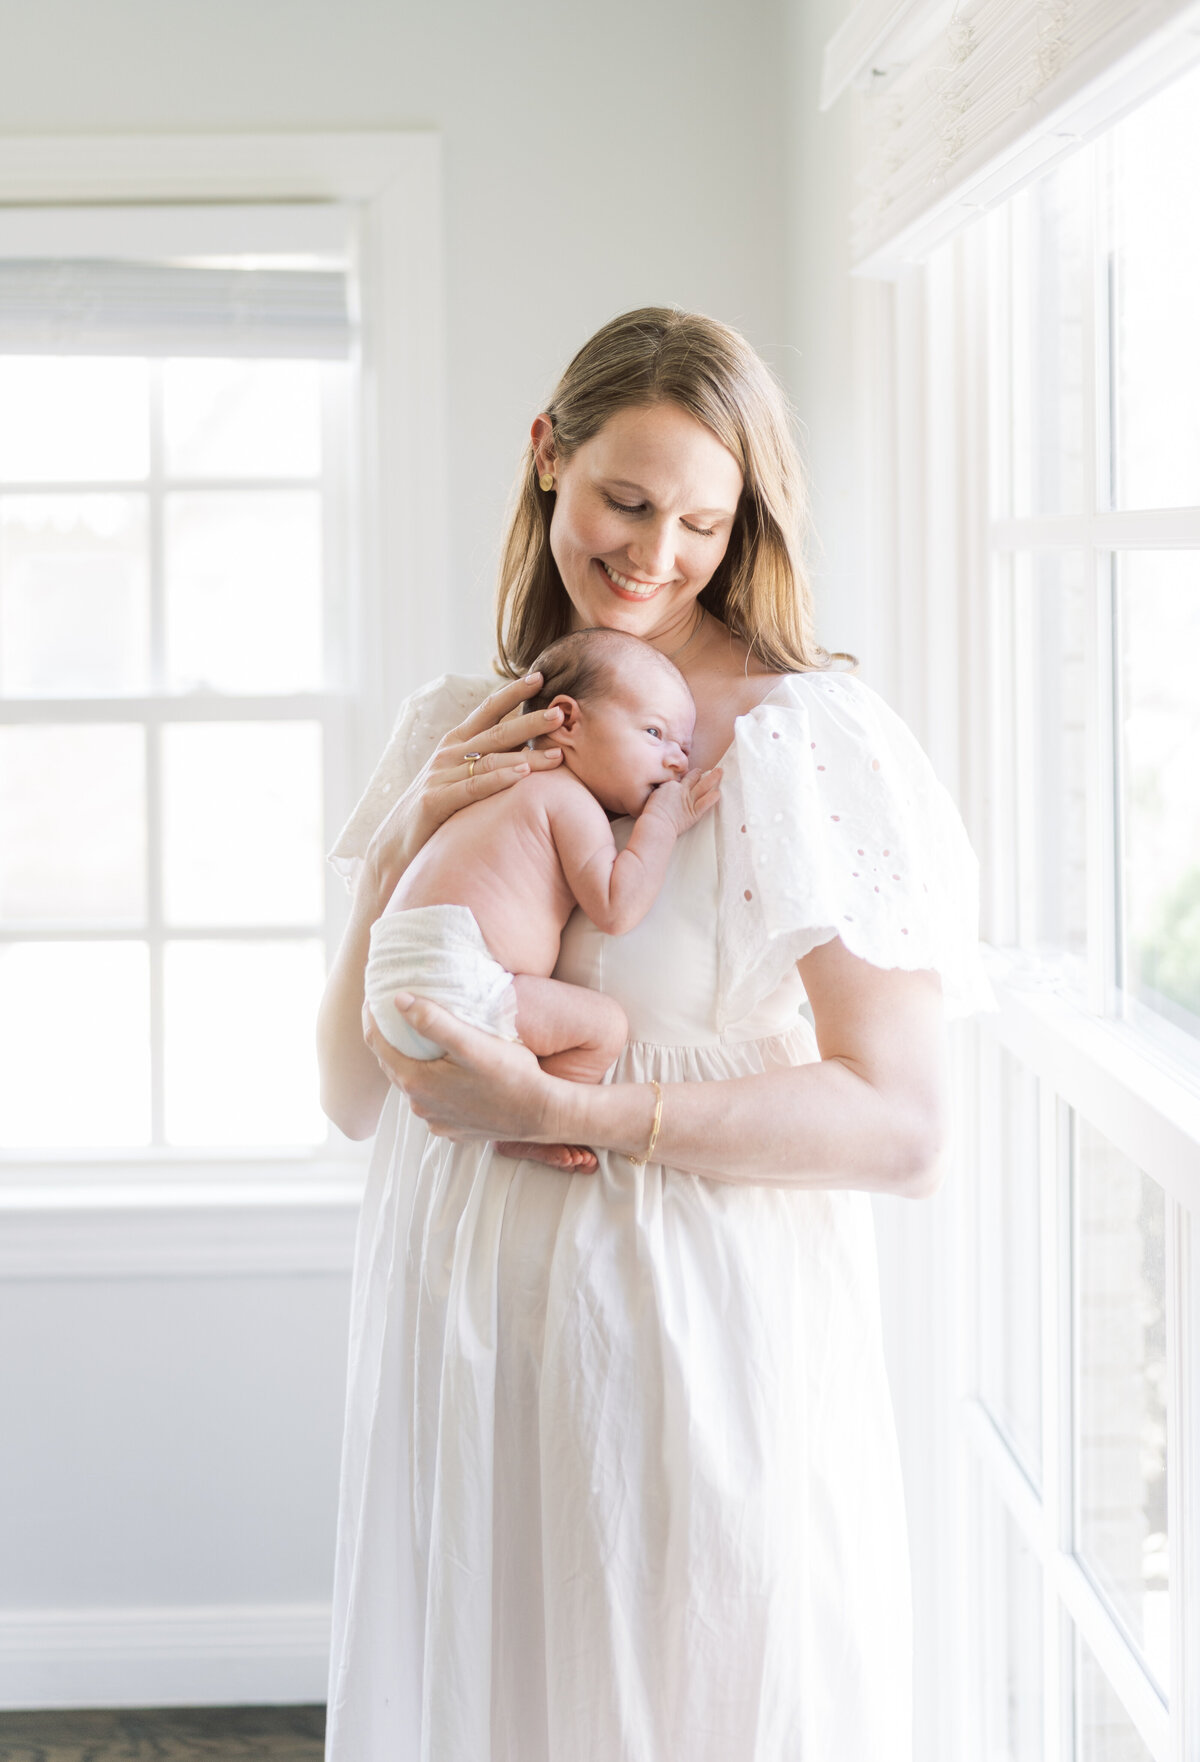 Portrait of a smiling woman in a white dress holding a newborn baby in her arms in front of a set of windows.